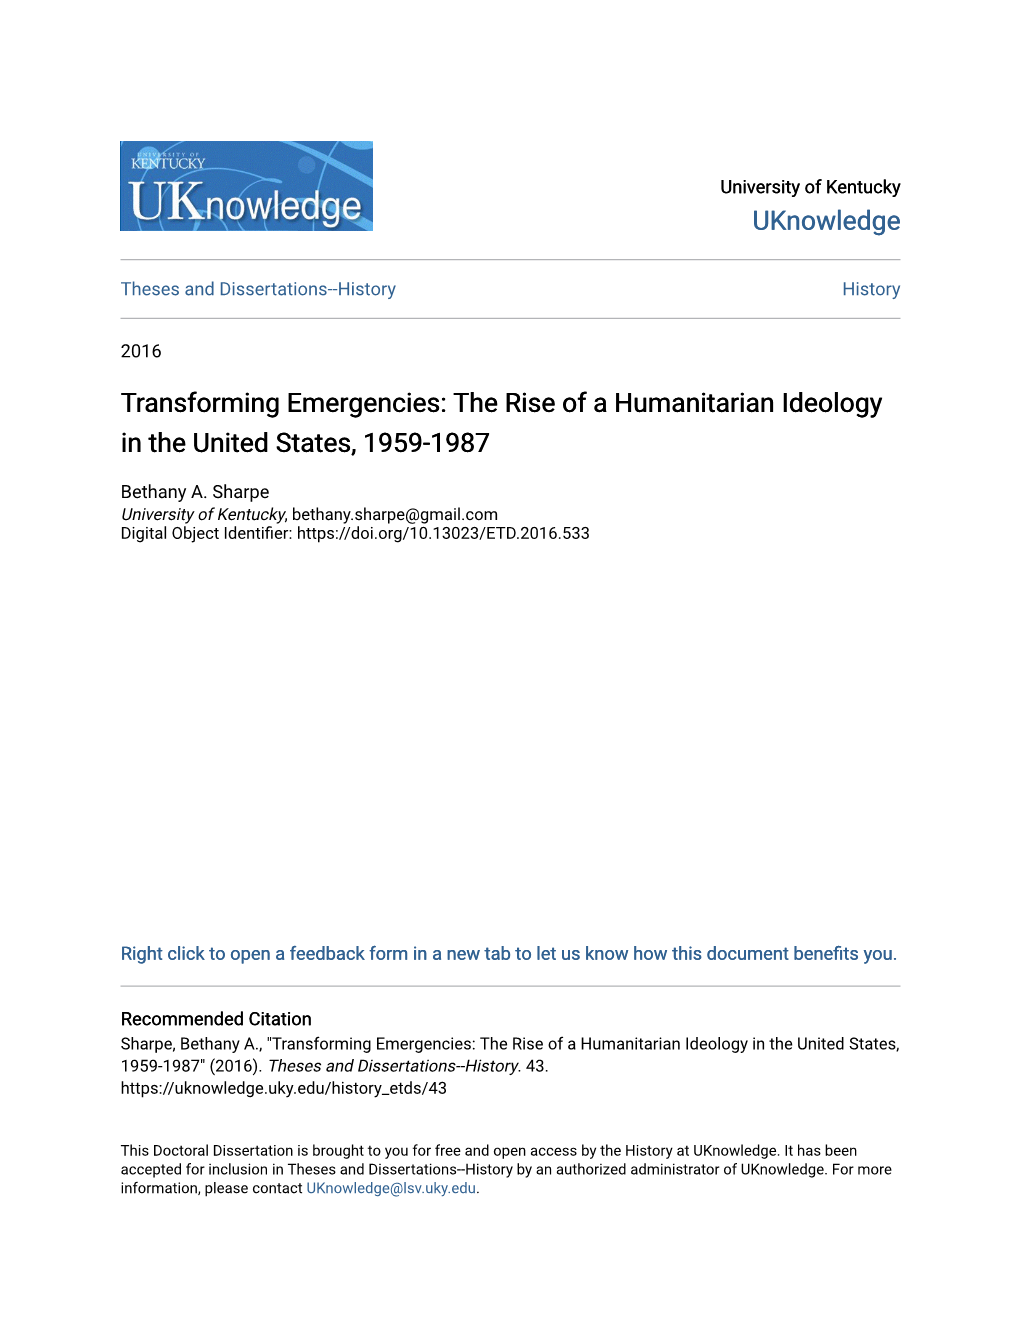 Transforming Emergencies: the Rise of a Humanitarian Ideology in the United States, 1959-1987